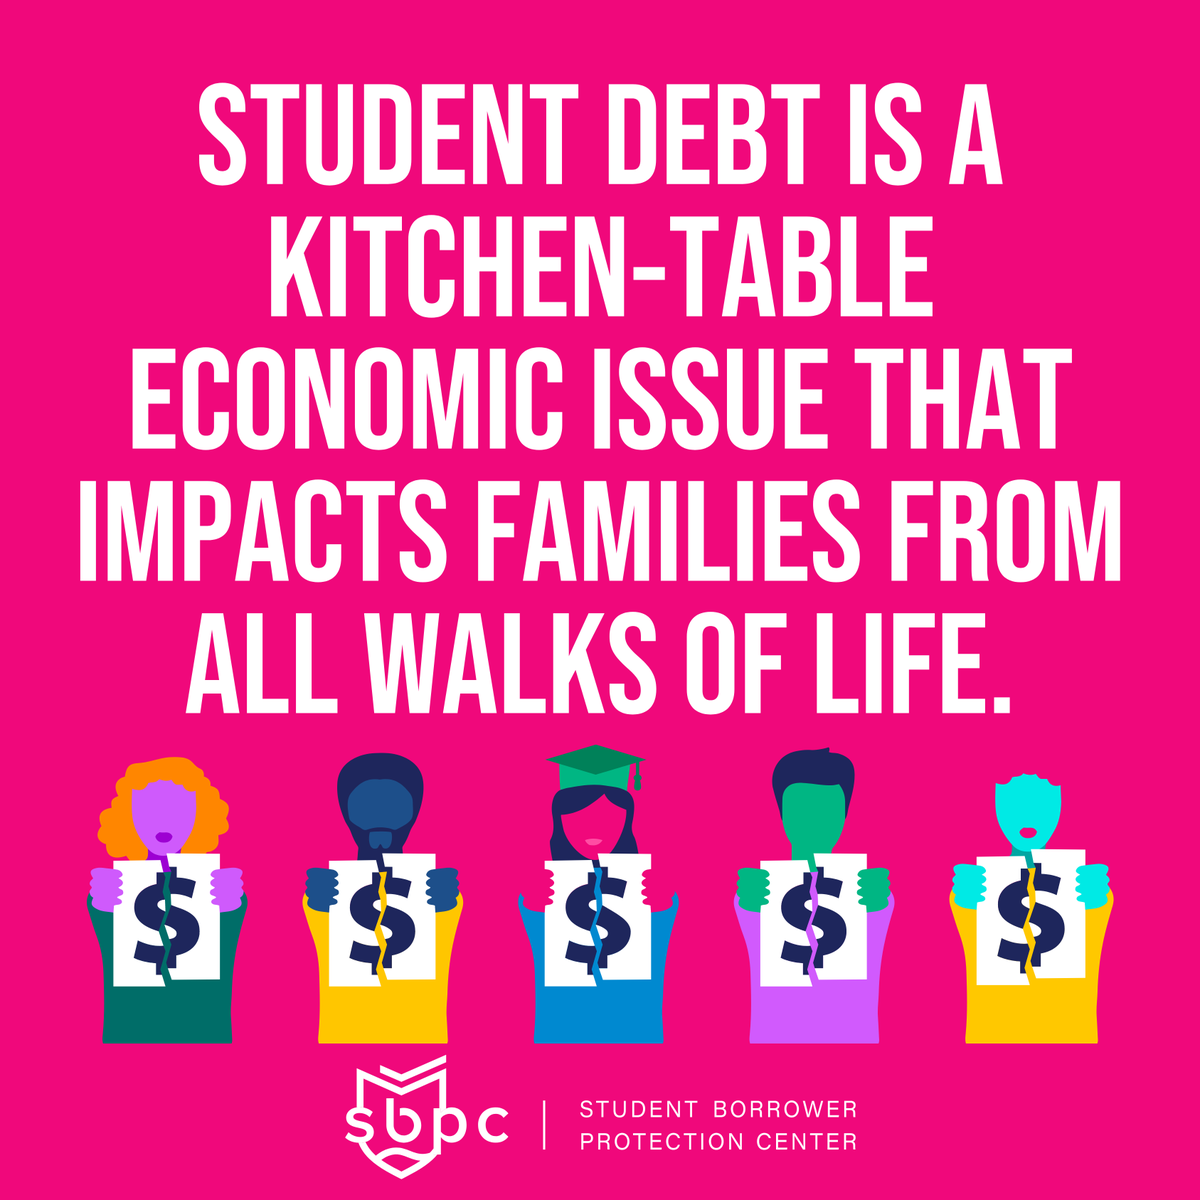 Student debt is an economic, racial, and intergenerational justice issue that prevents folks from purchasing homes or starting small businesses retiring or building retirement savings, and even starting or growing families.